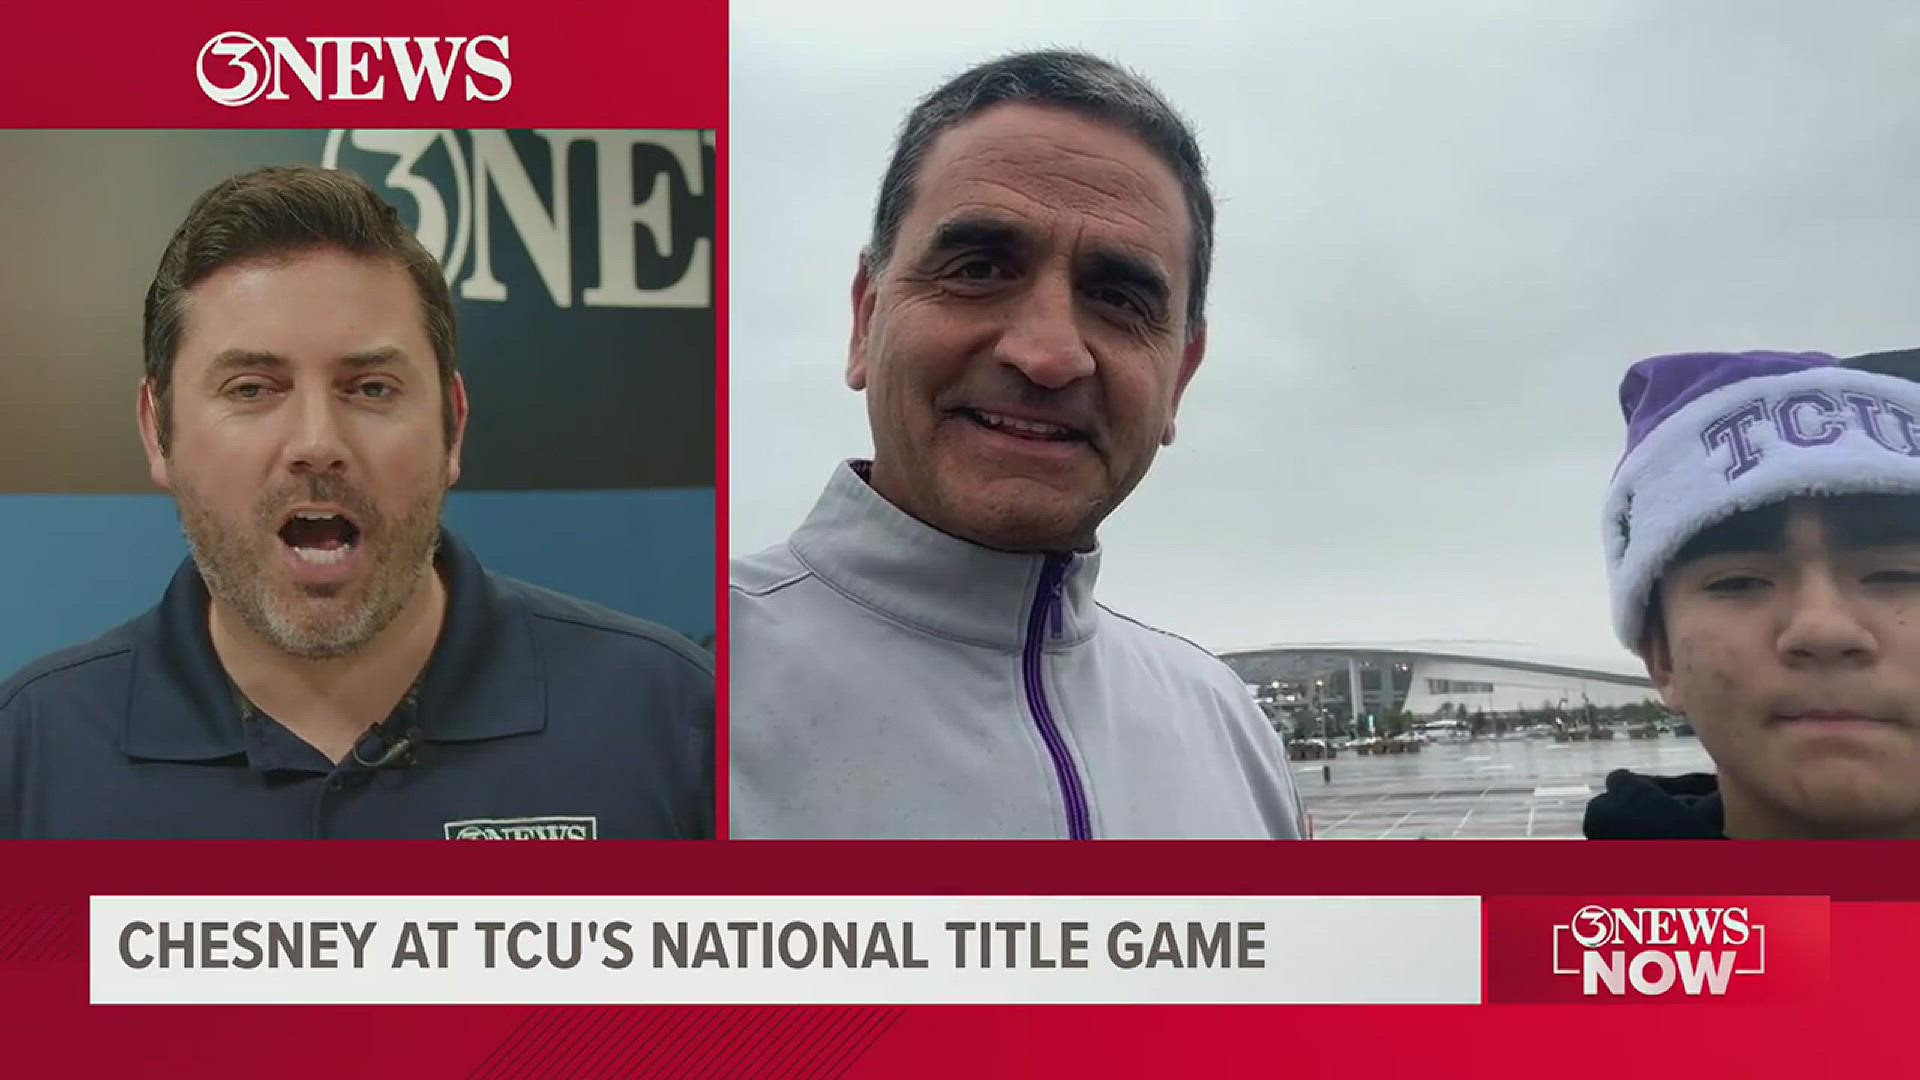 Chris Thomasson talks with Nueces County Commissioner Brent Chesney and his son Gabriel who are out in LA for TCU's national title game against Georgia Monday.